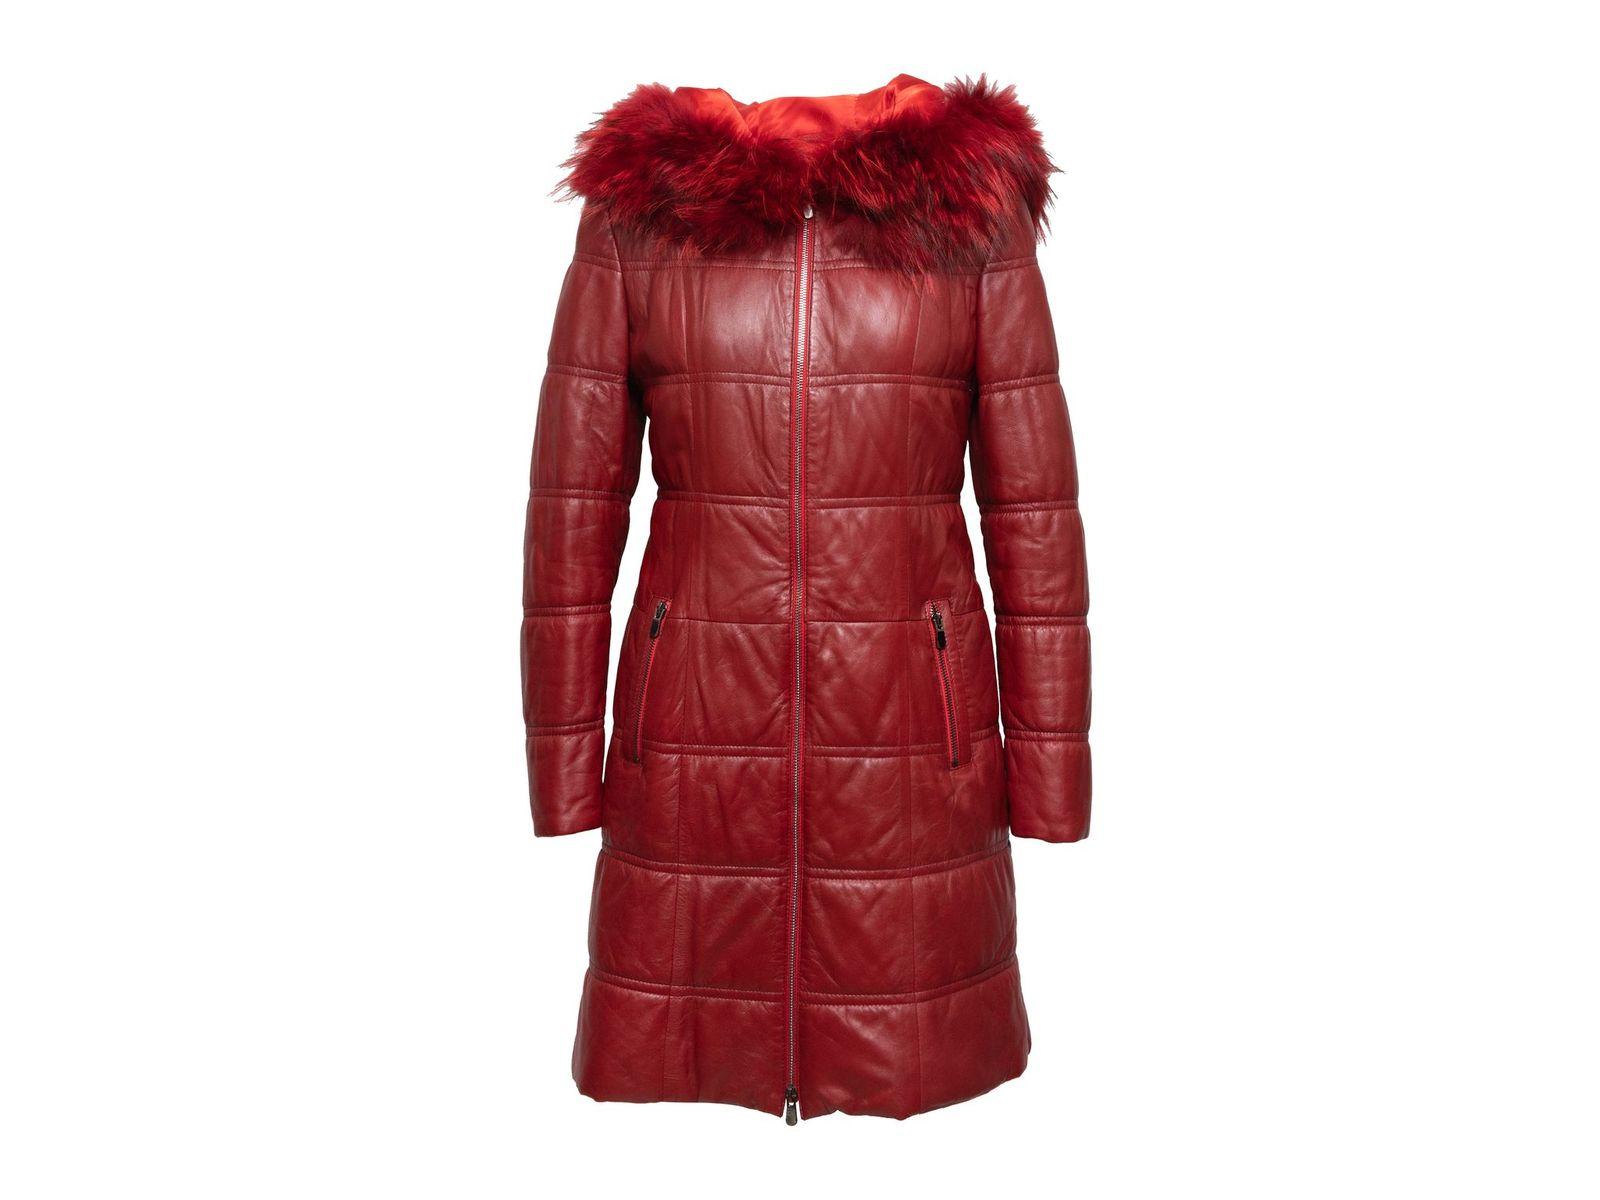 Women's Camerino Red Quilted Leather & Fur-Trimmed Coat